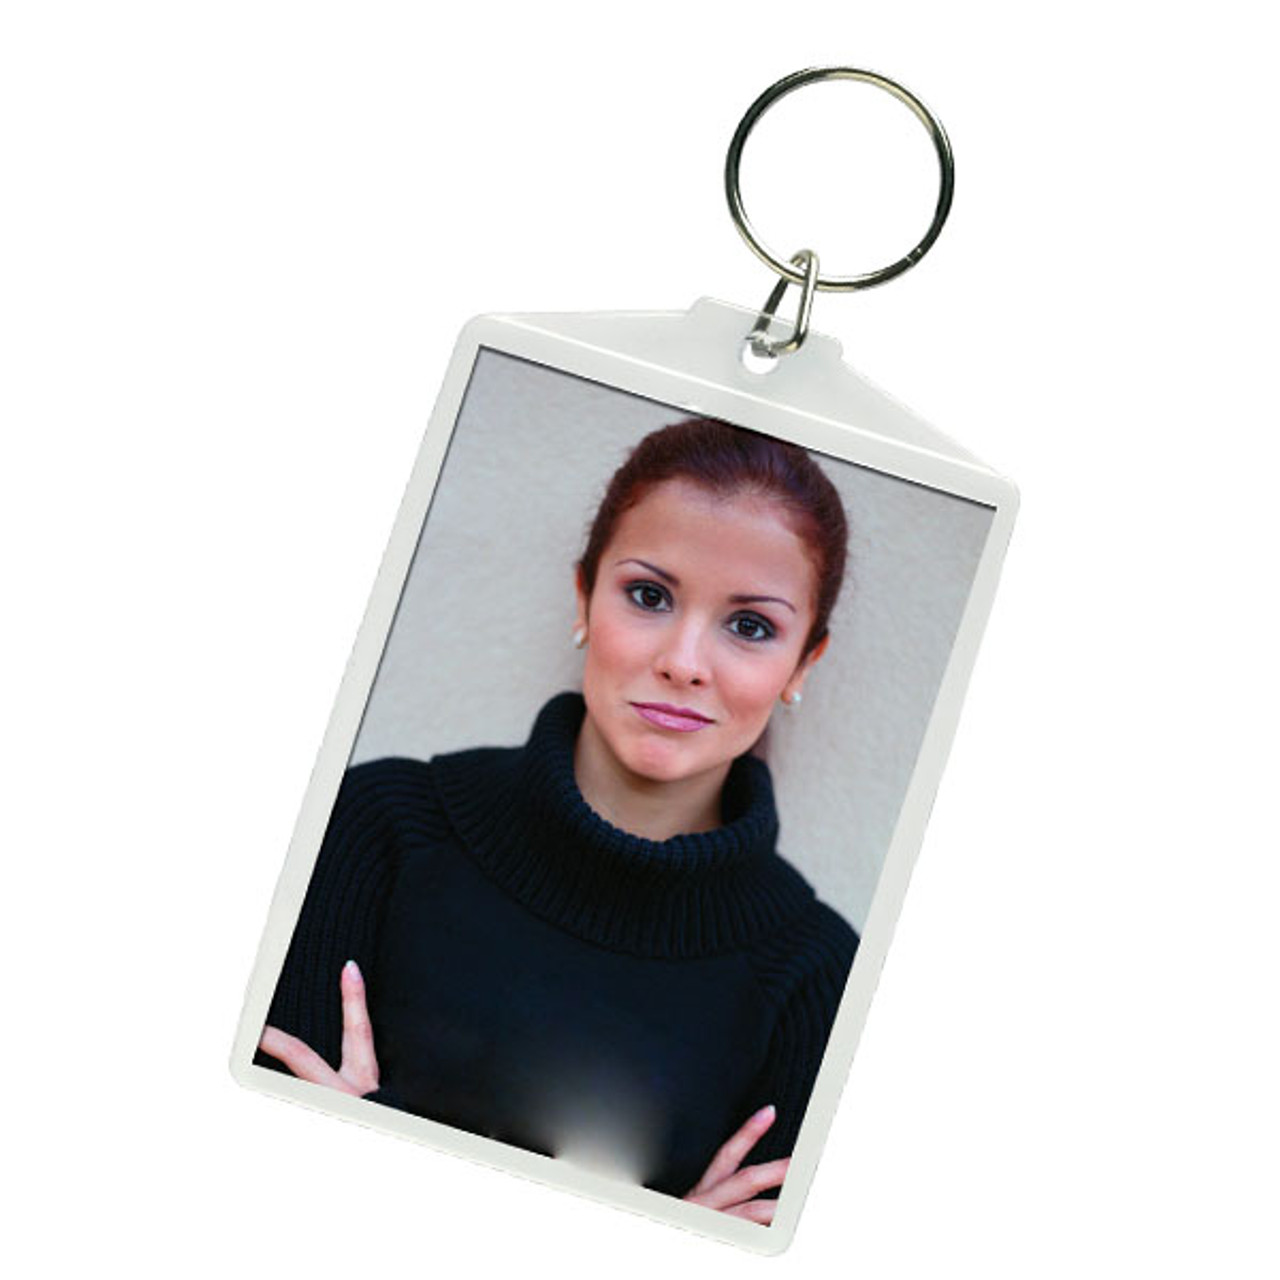 Extra Large Snap-Together Photo Holder Key Chain 2-1/2 Inch x 3-1/2 Inch  Insert